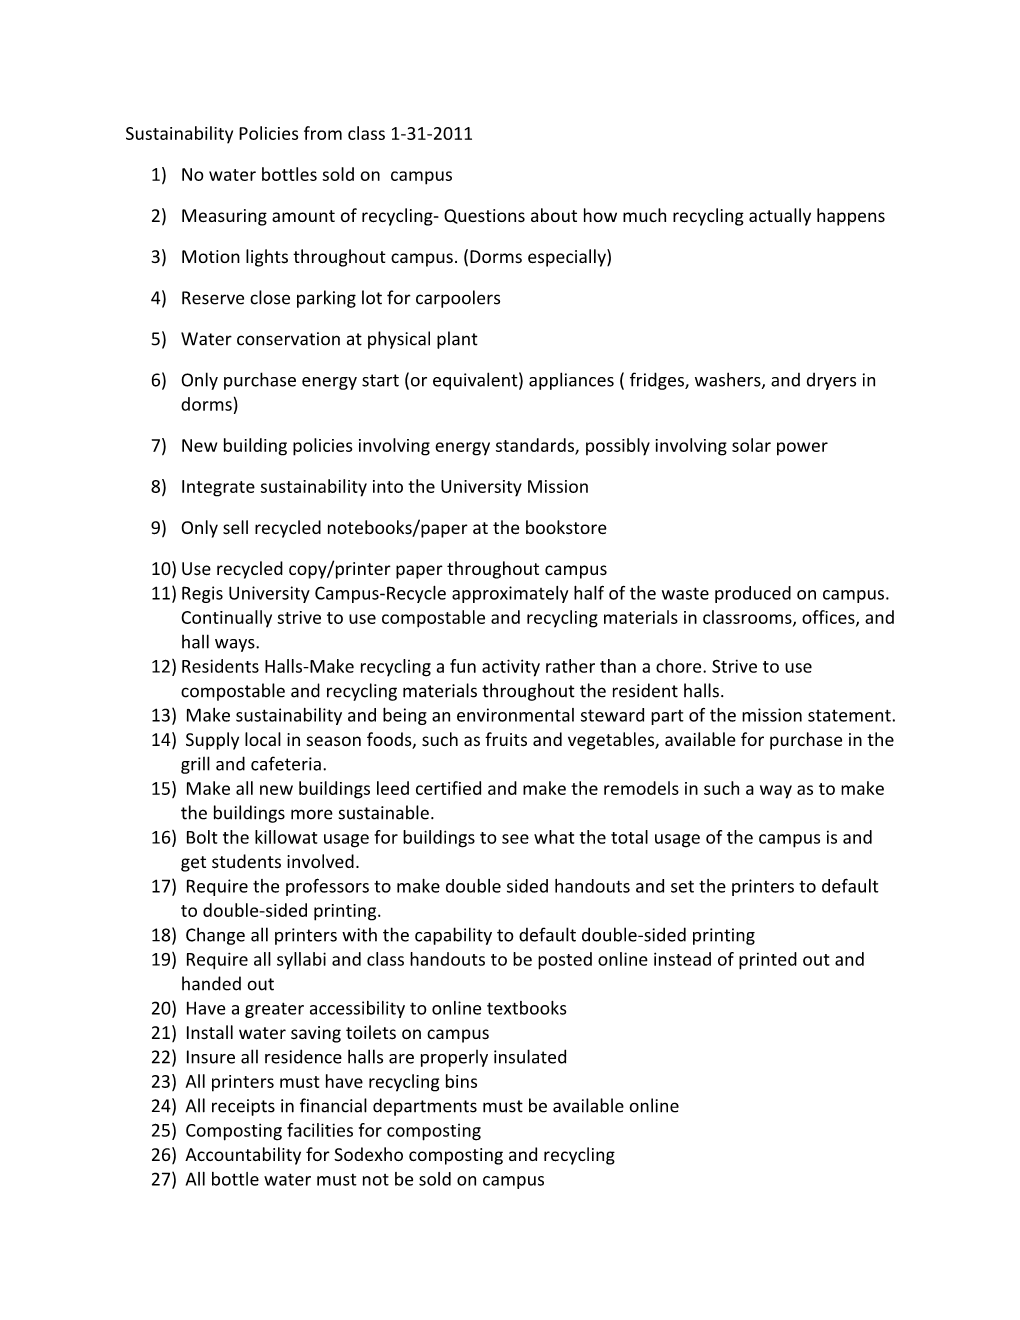 Sustainability Policies from Class 1-31-2011